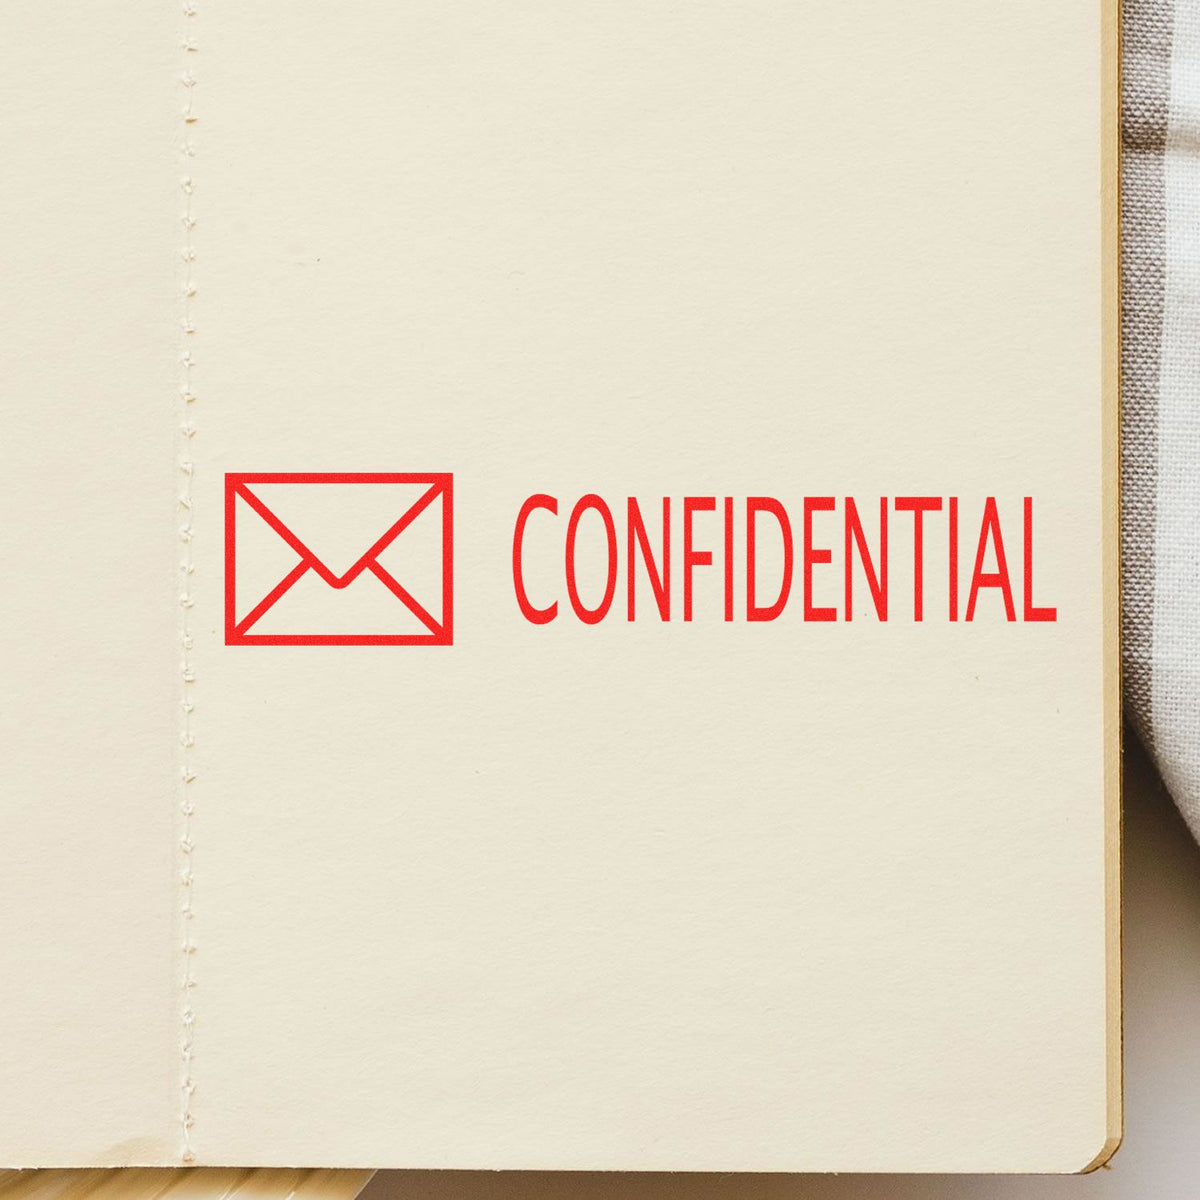 Confidential with Envelope Rubber Stamp In Use Photo